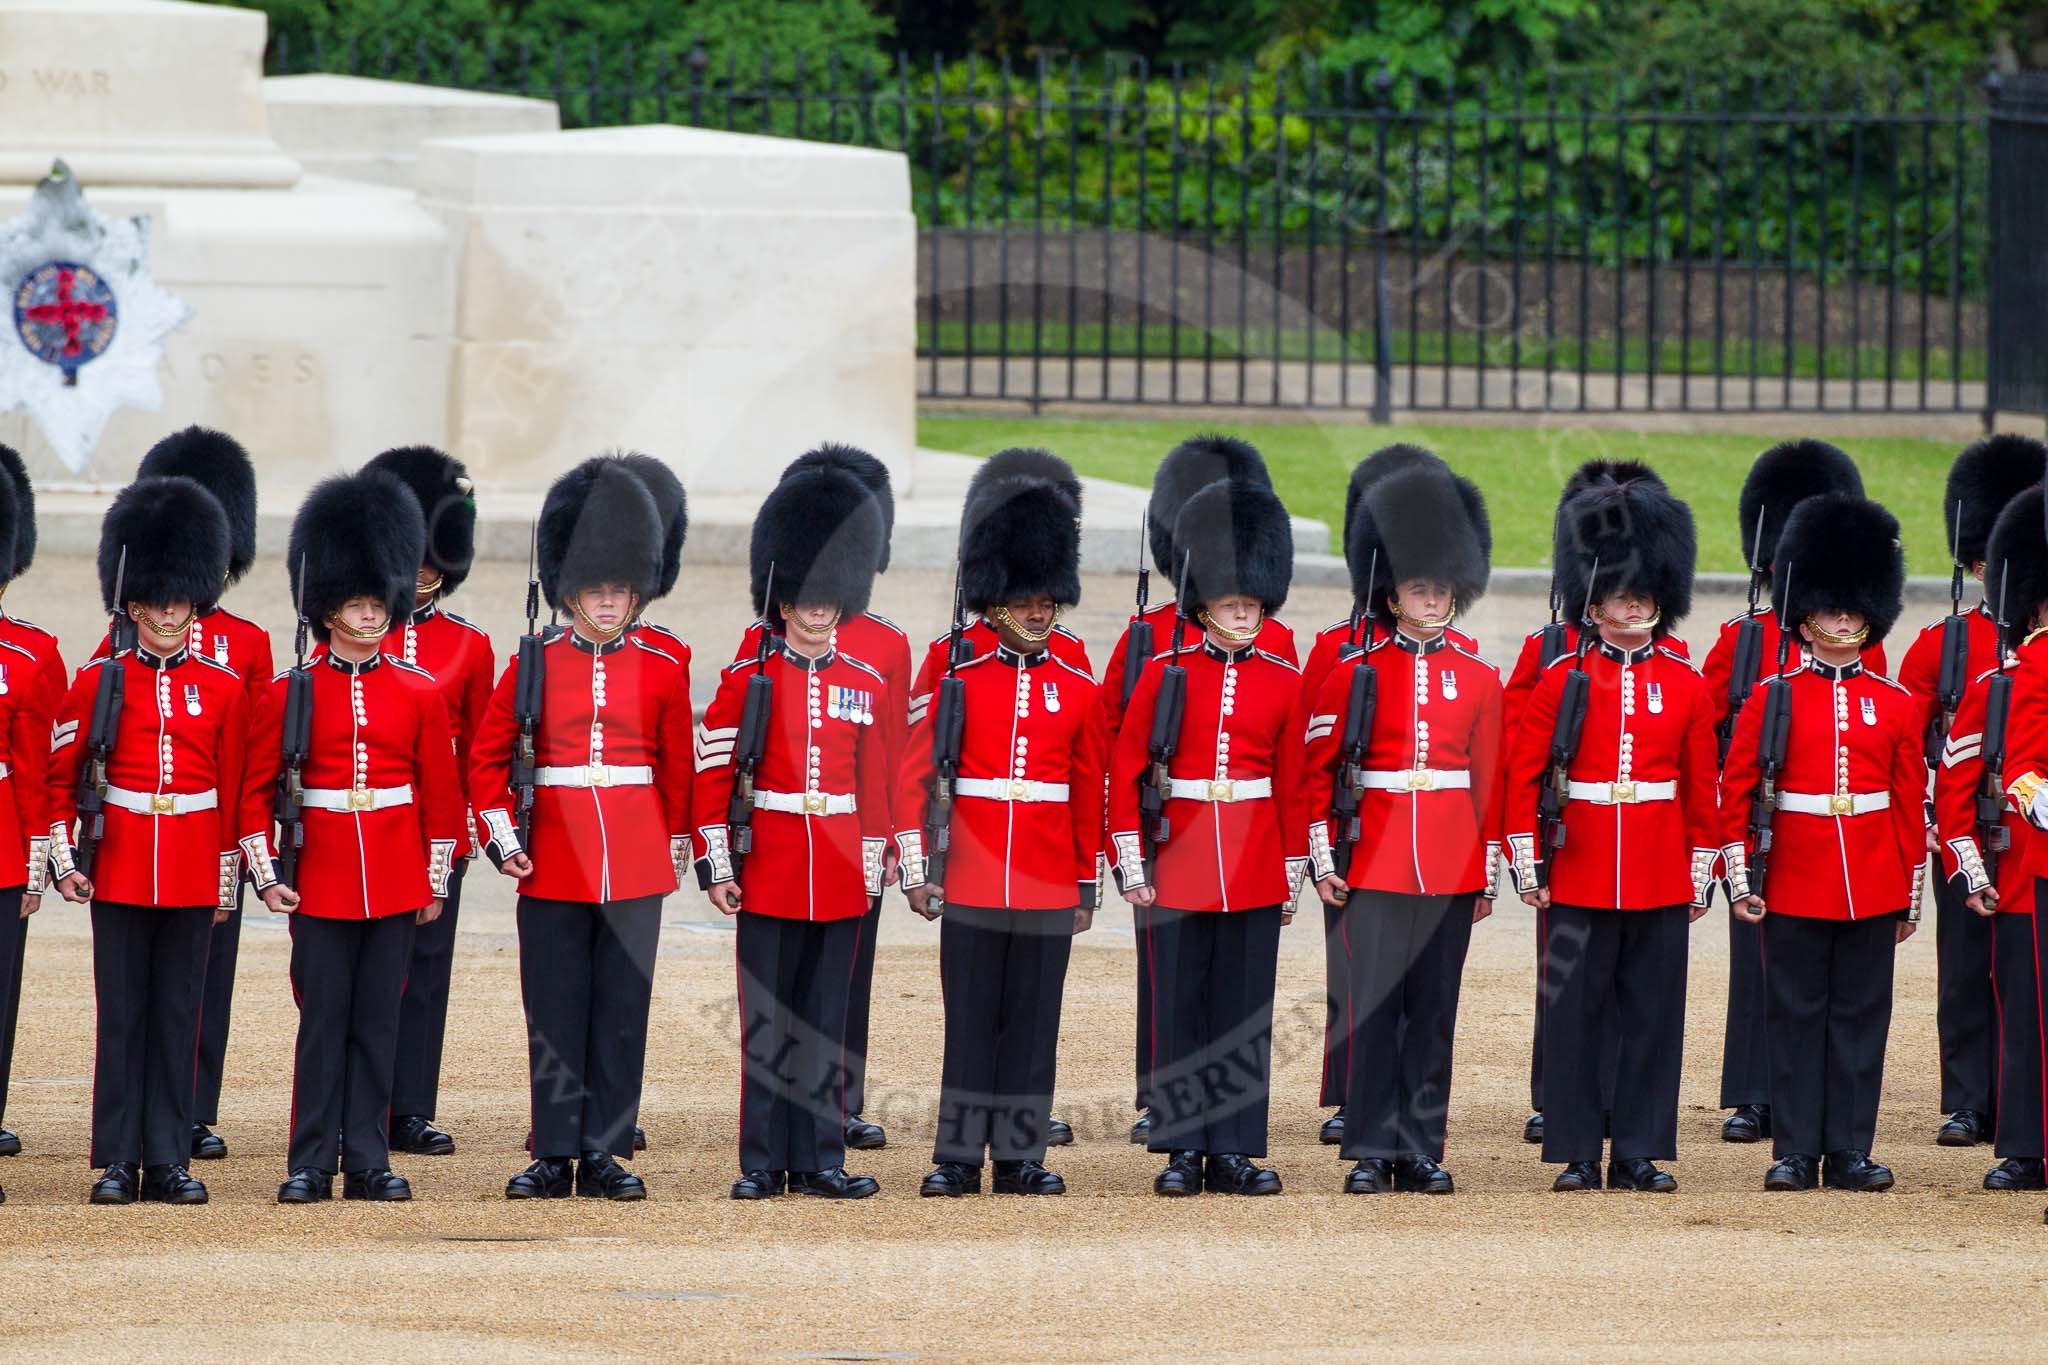 Major General's Review 2013: No.3 Guard 1 st Battalion Welsh Guards..
Horse Guards Parade, Westminster,
London SW1,

United Kingdom,
on 01 June 2013 at 10:42, image #180